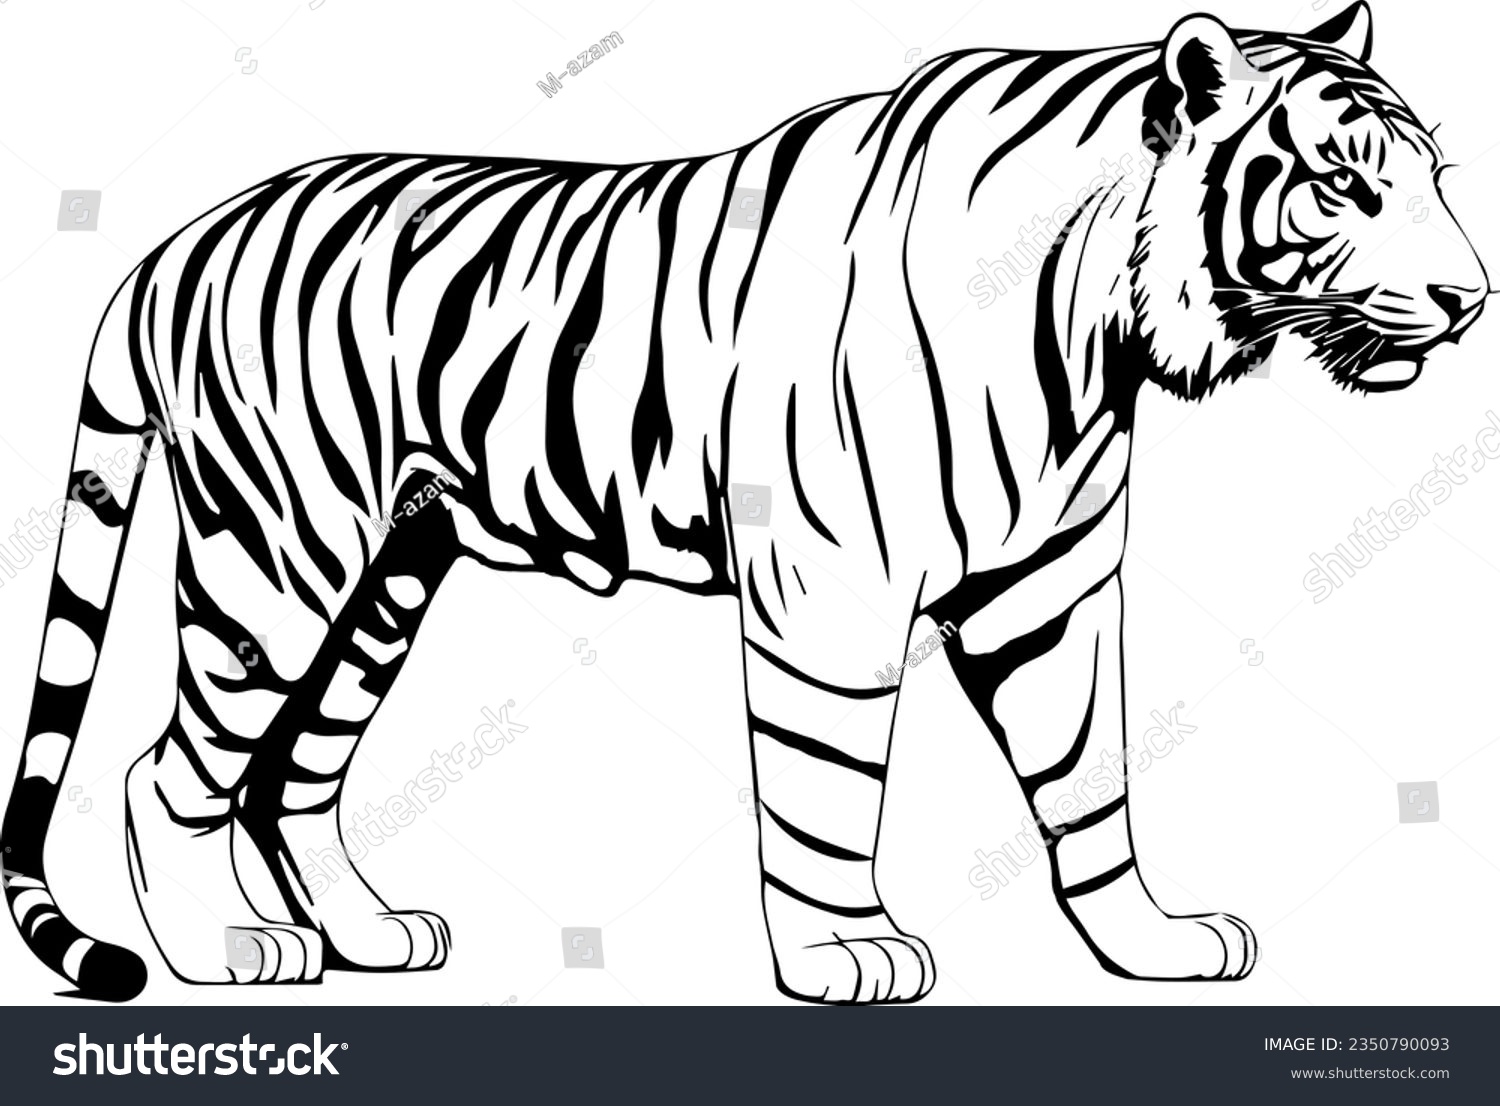 Tiger Silhouette Vector Illustration Isolated On Royalty Free Stock Vector 2350790093 